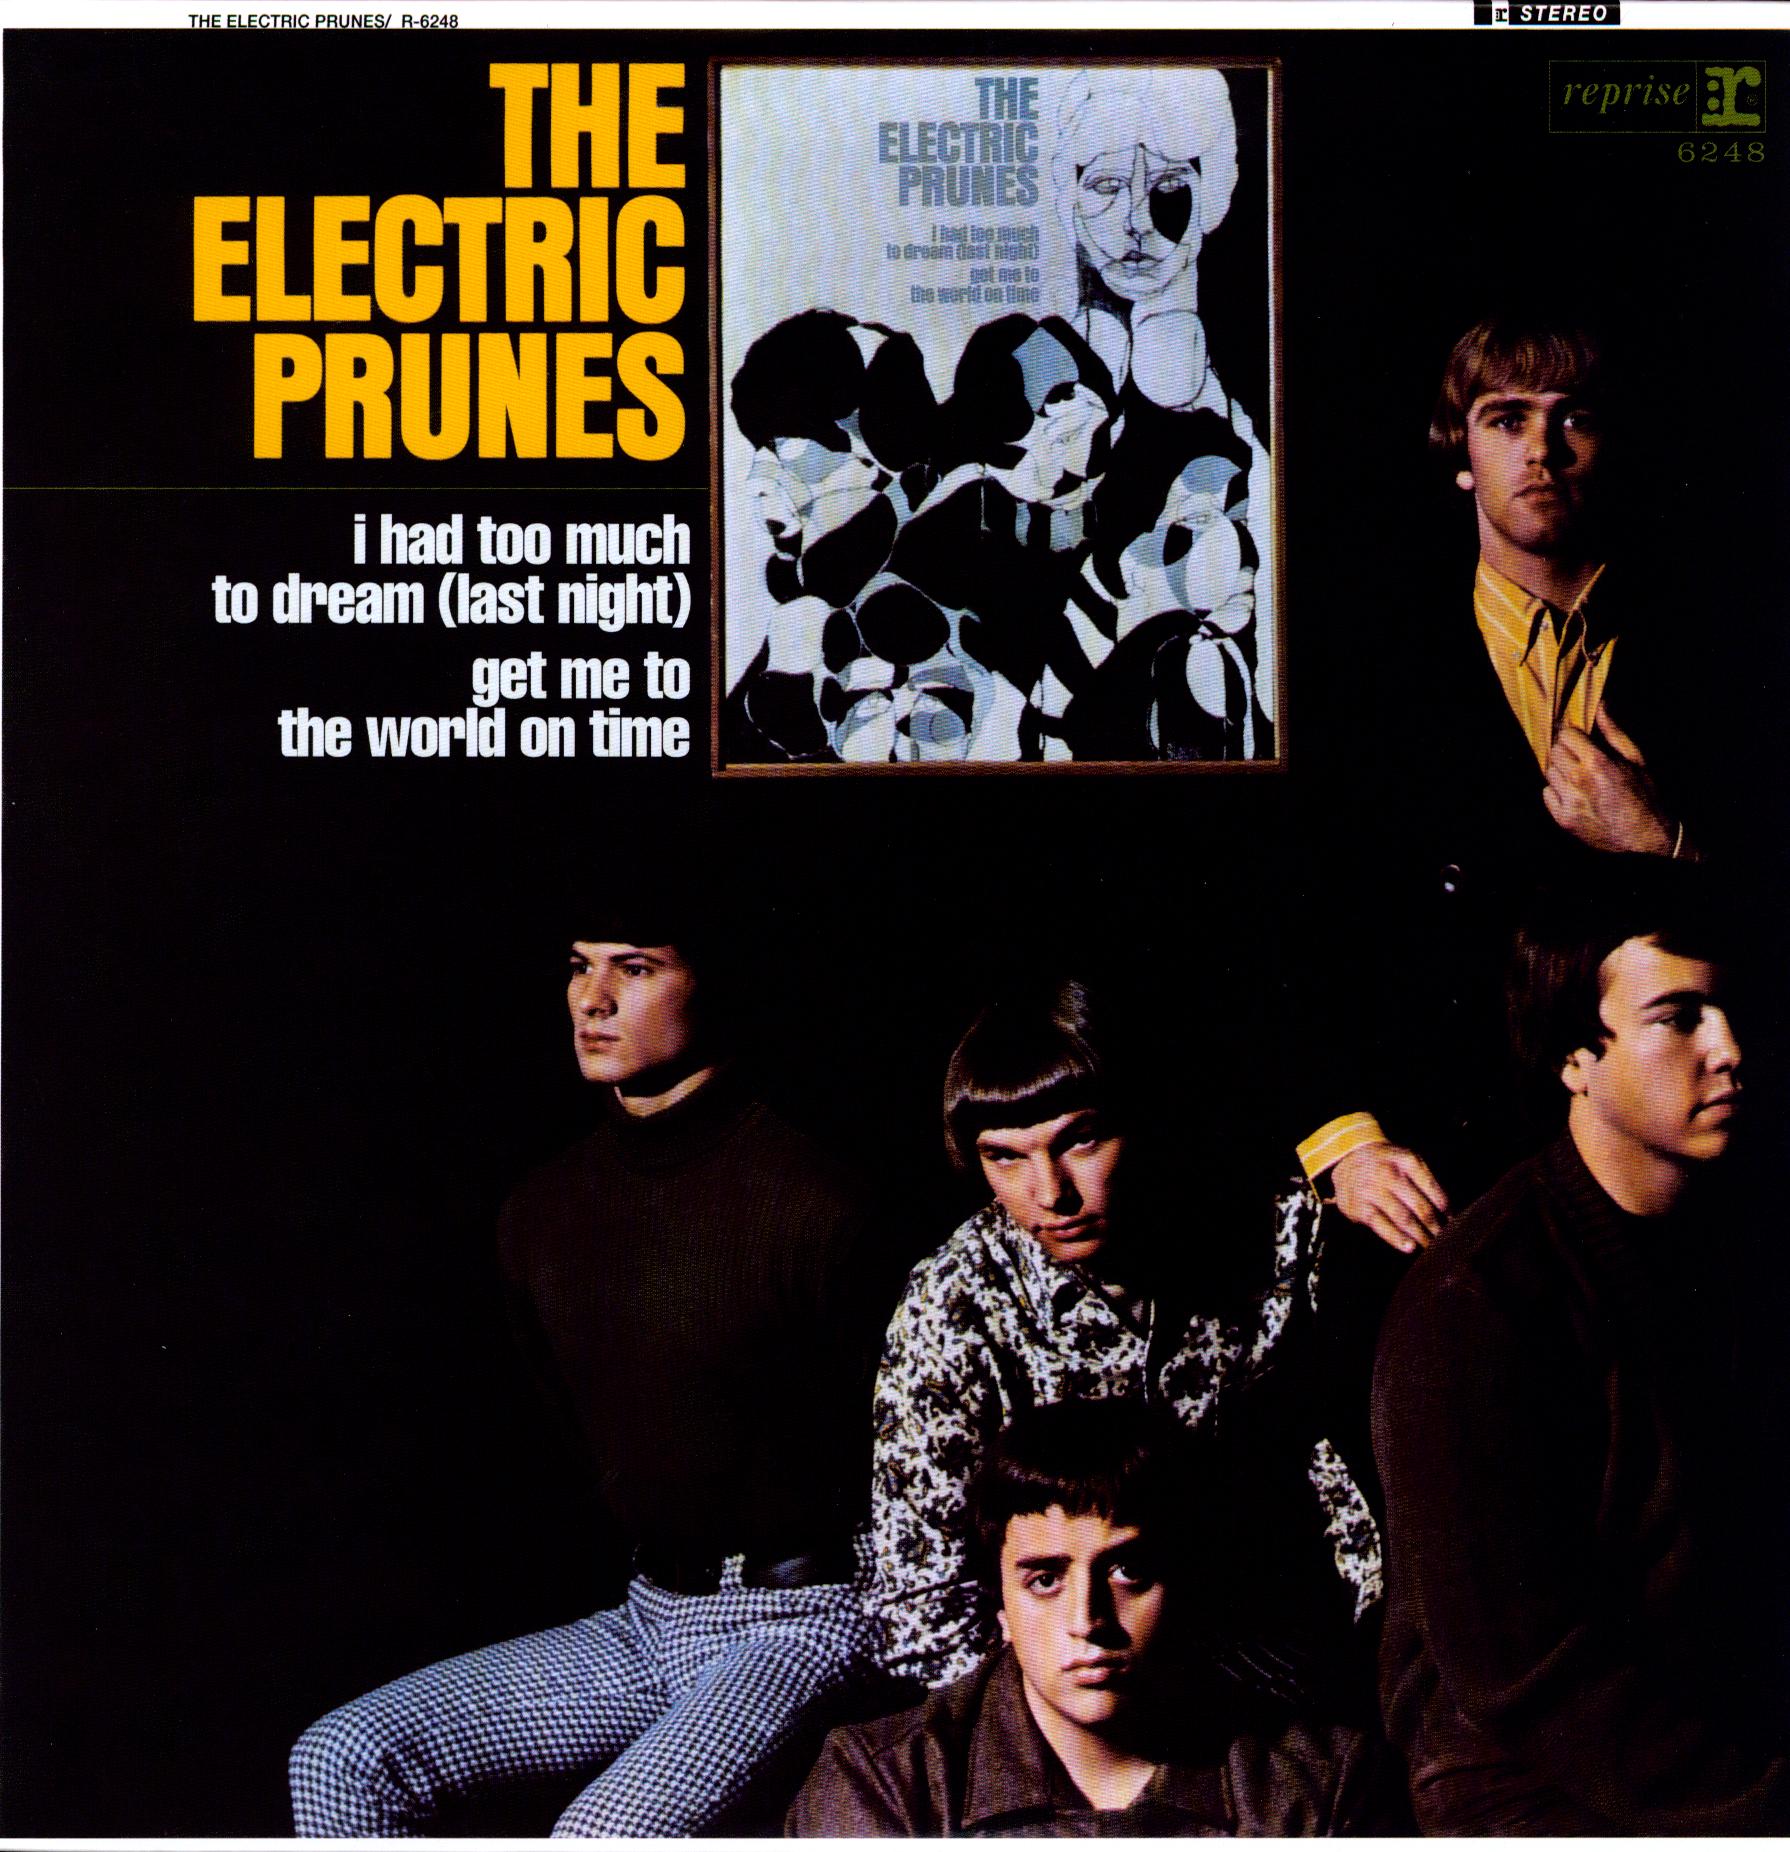 ELECTRIC PRUNES: I HAD TOO MUCH TO DREAM (OGV)